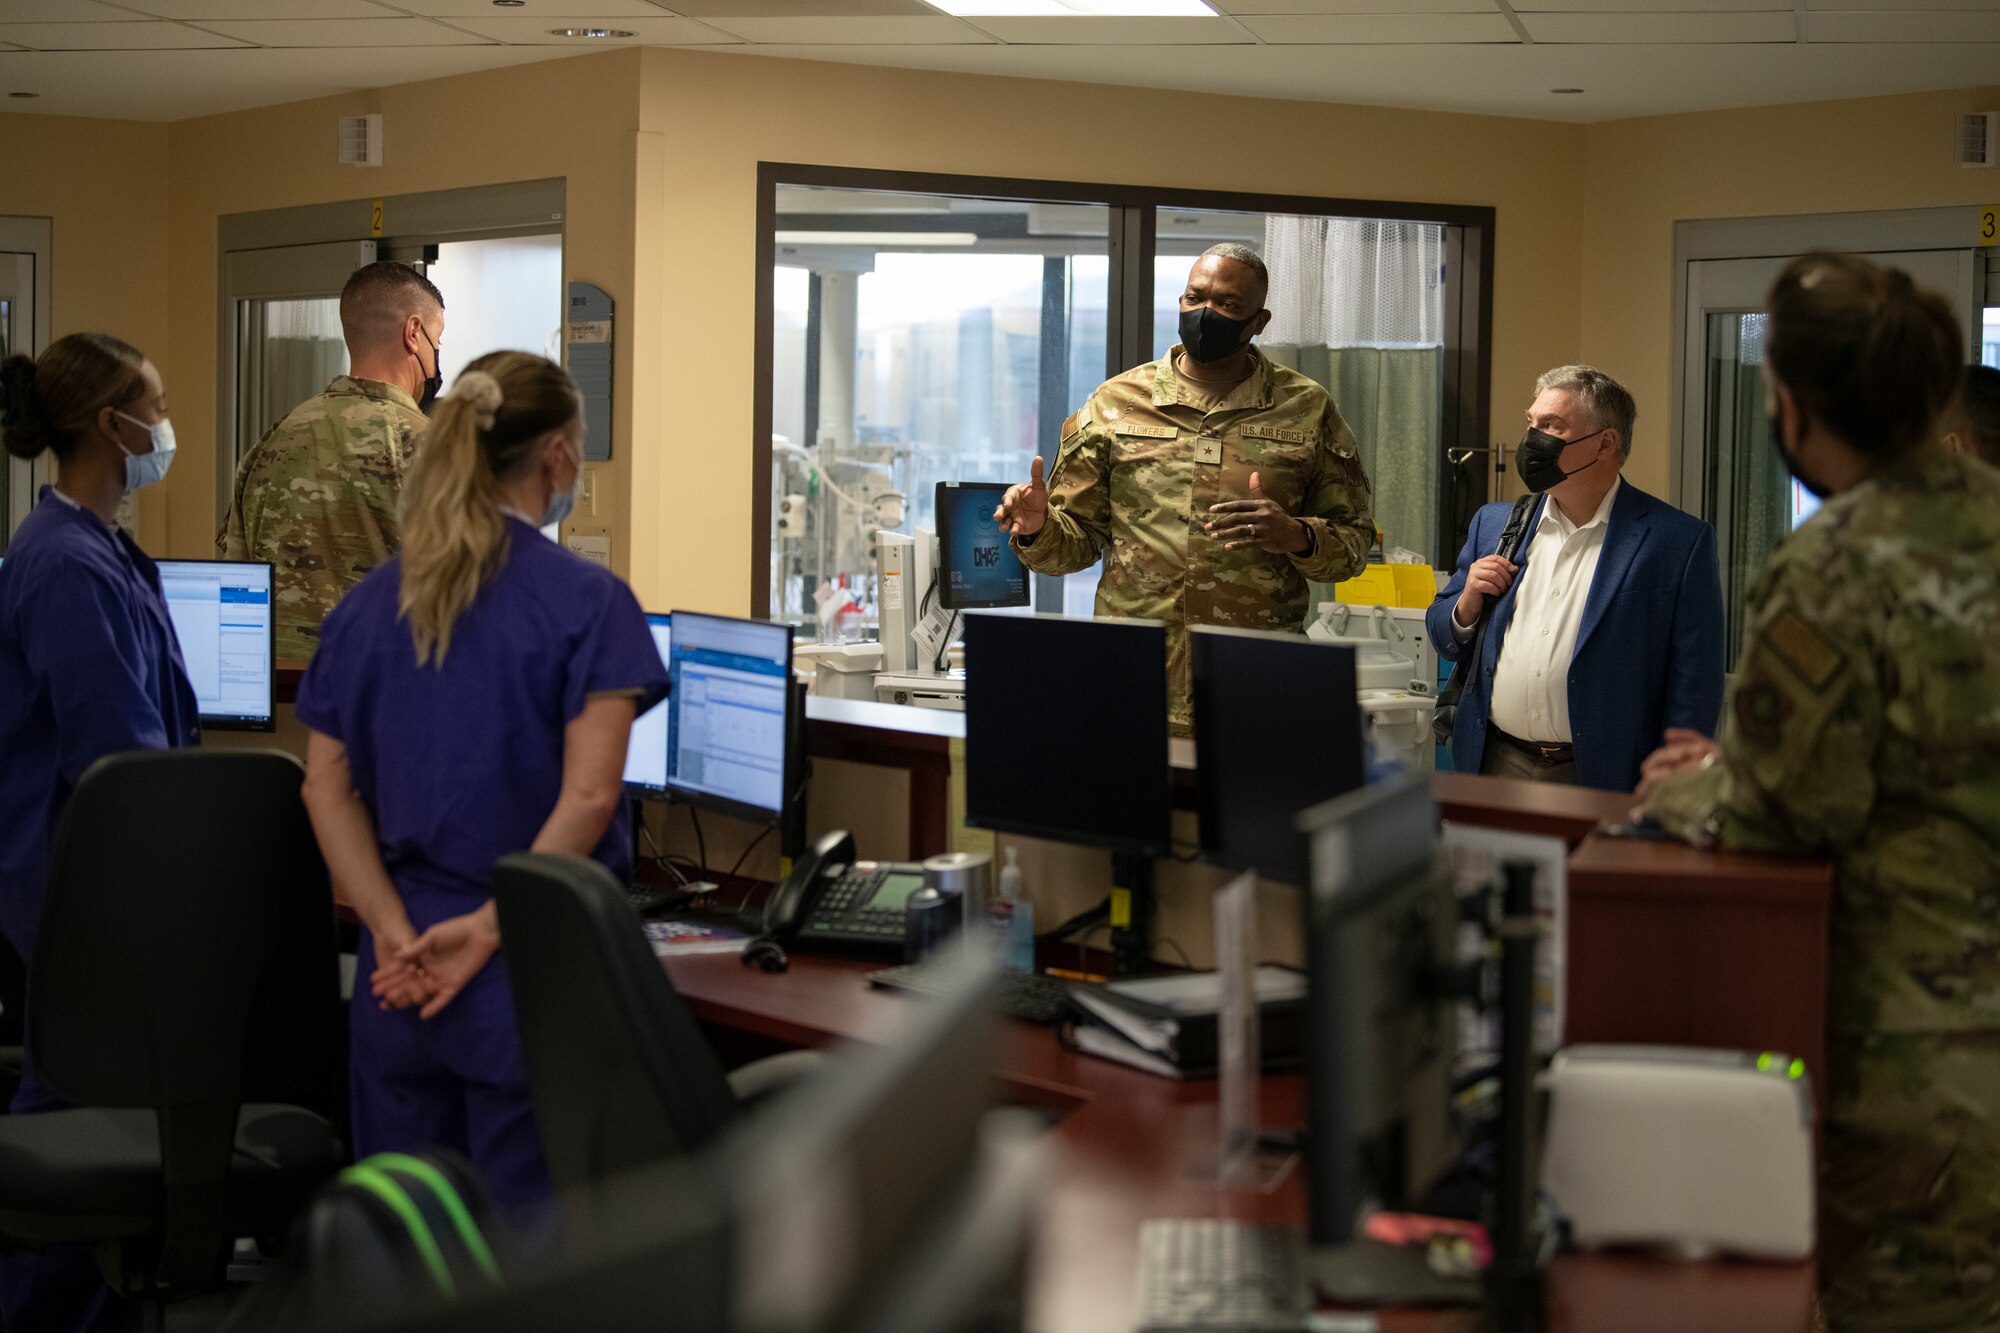 U.S. Air Force Brig. Gen. Alfred K. Flowers, Jr., center, meet with Airmen in the intensive care unit at David Grant USAF Medical Center, Travis Air Force Base, California, Oct. 12, 2022.